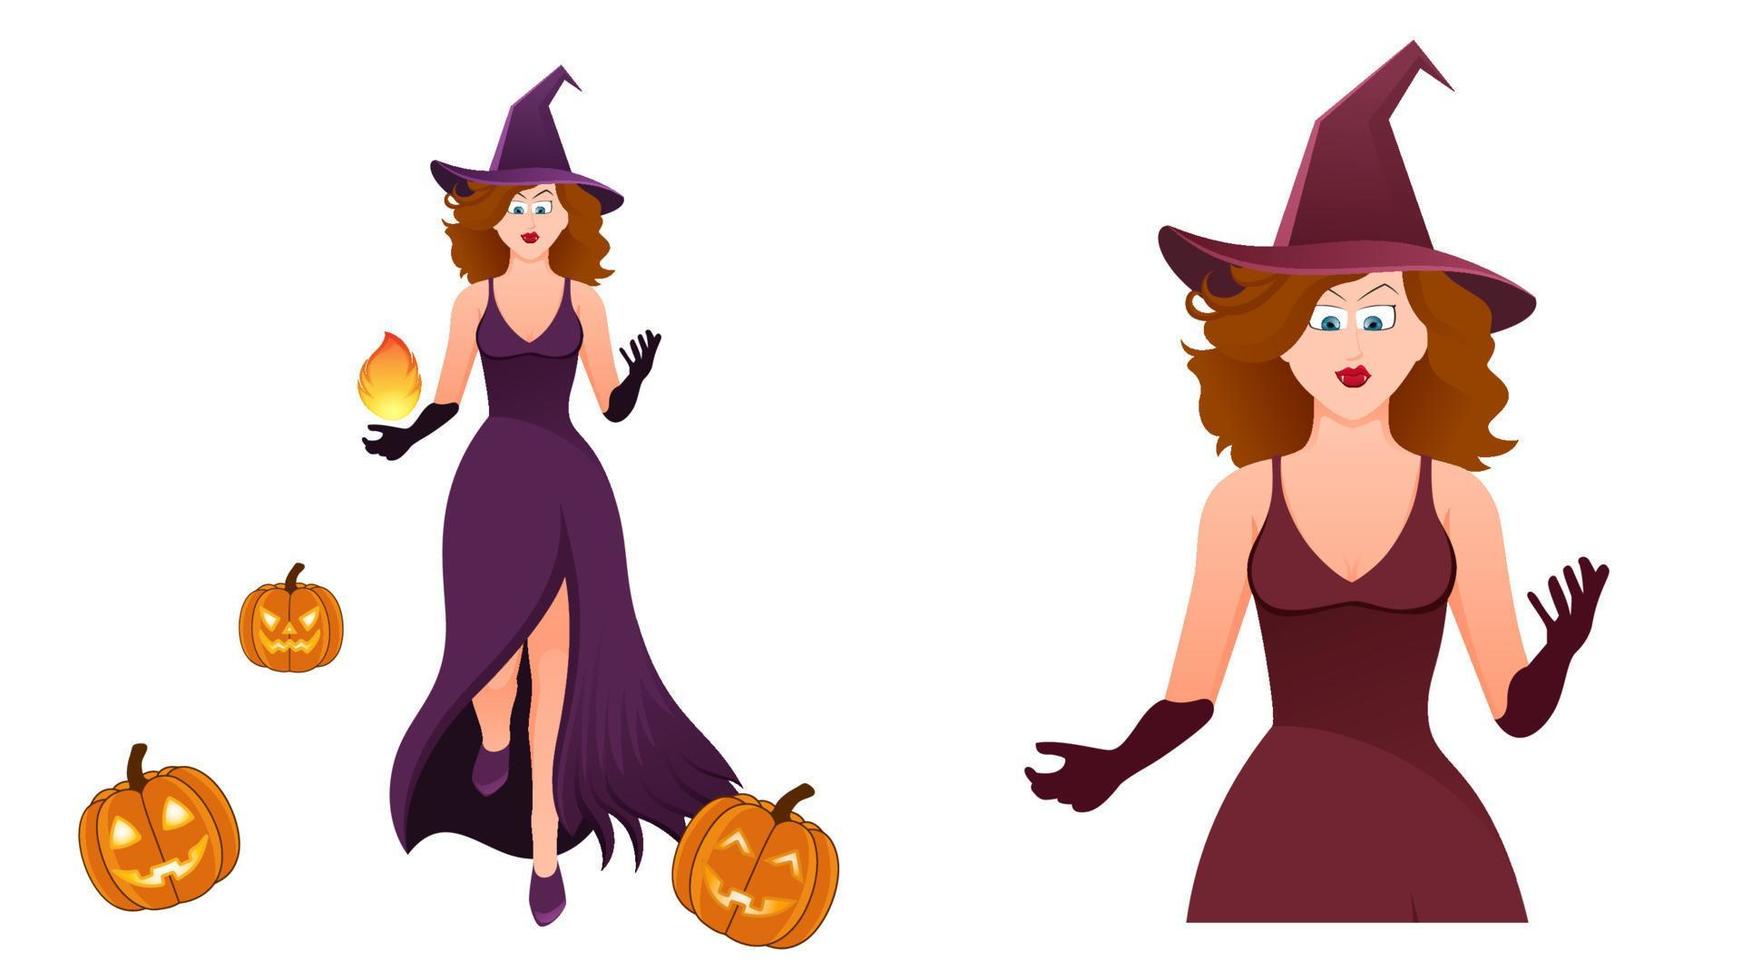 Halloween witch vector illustration, witch character vector illustration